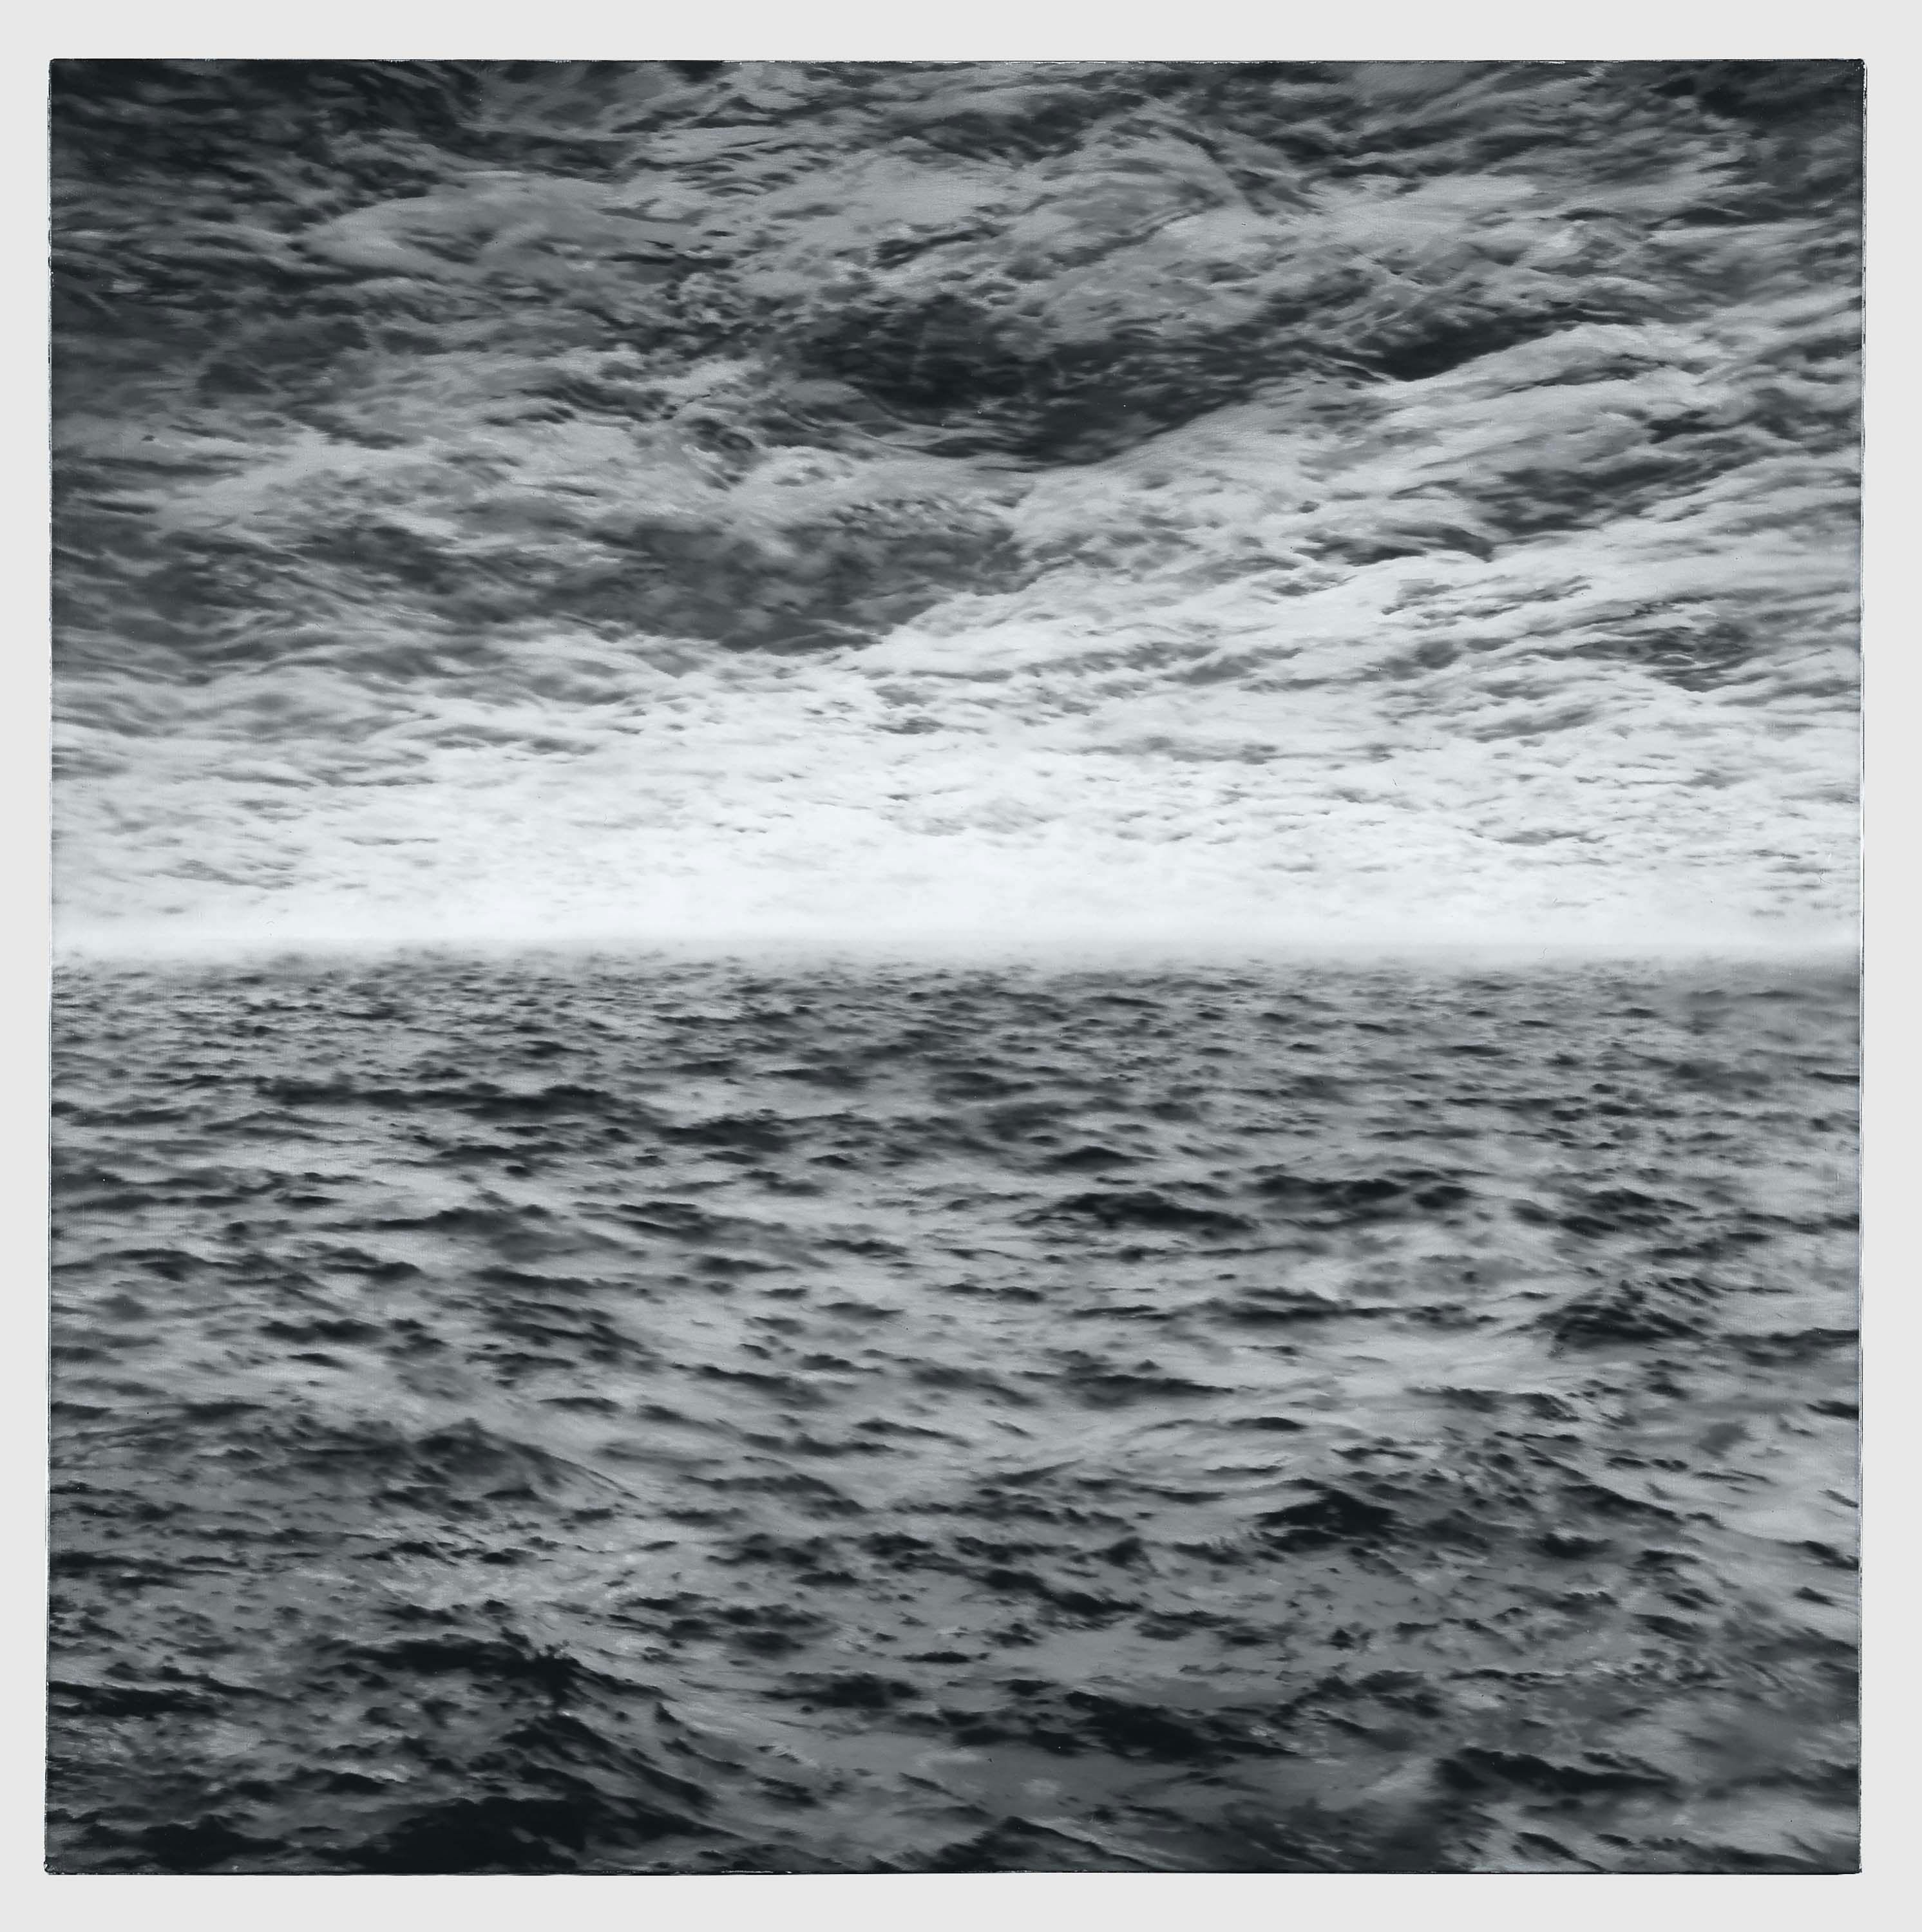 A painting by Gerhard Richter, titled Seestück (See-see) (Seascape [Sea-Sea]), dated 1970.